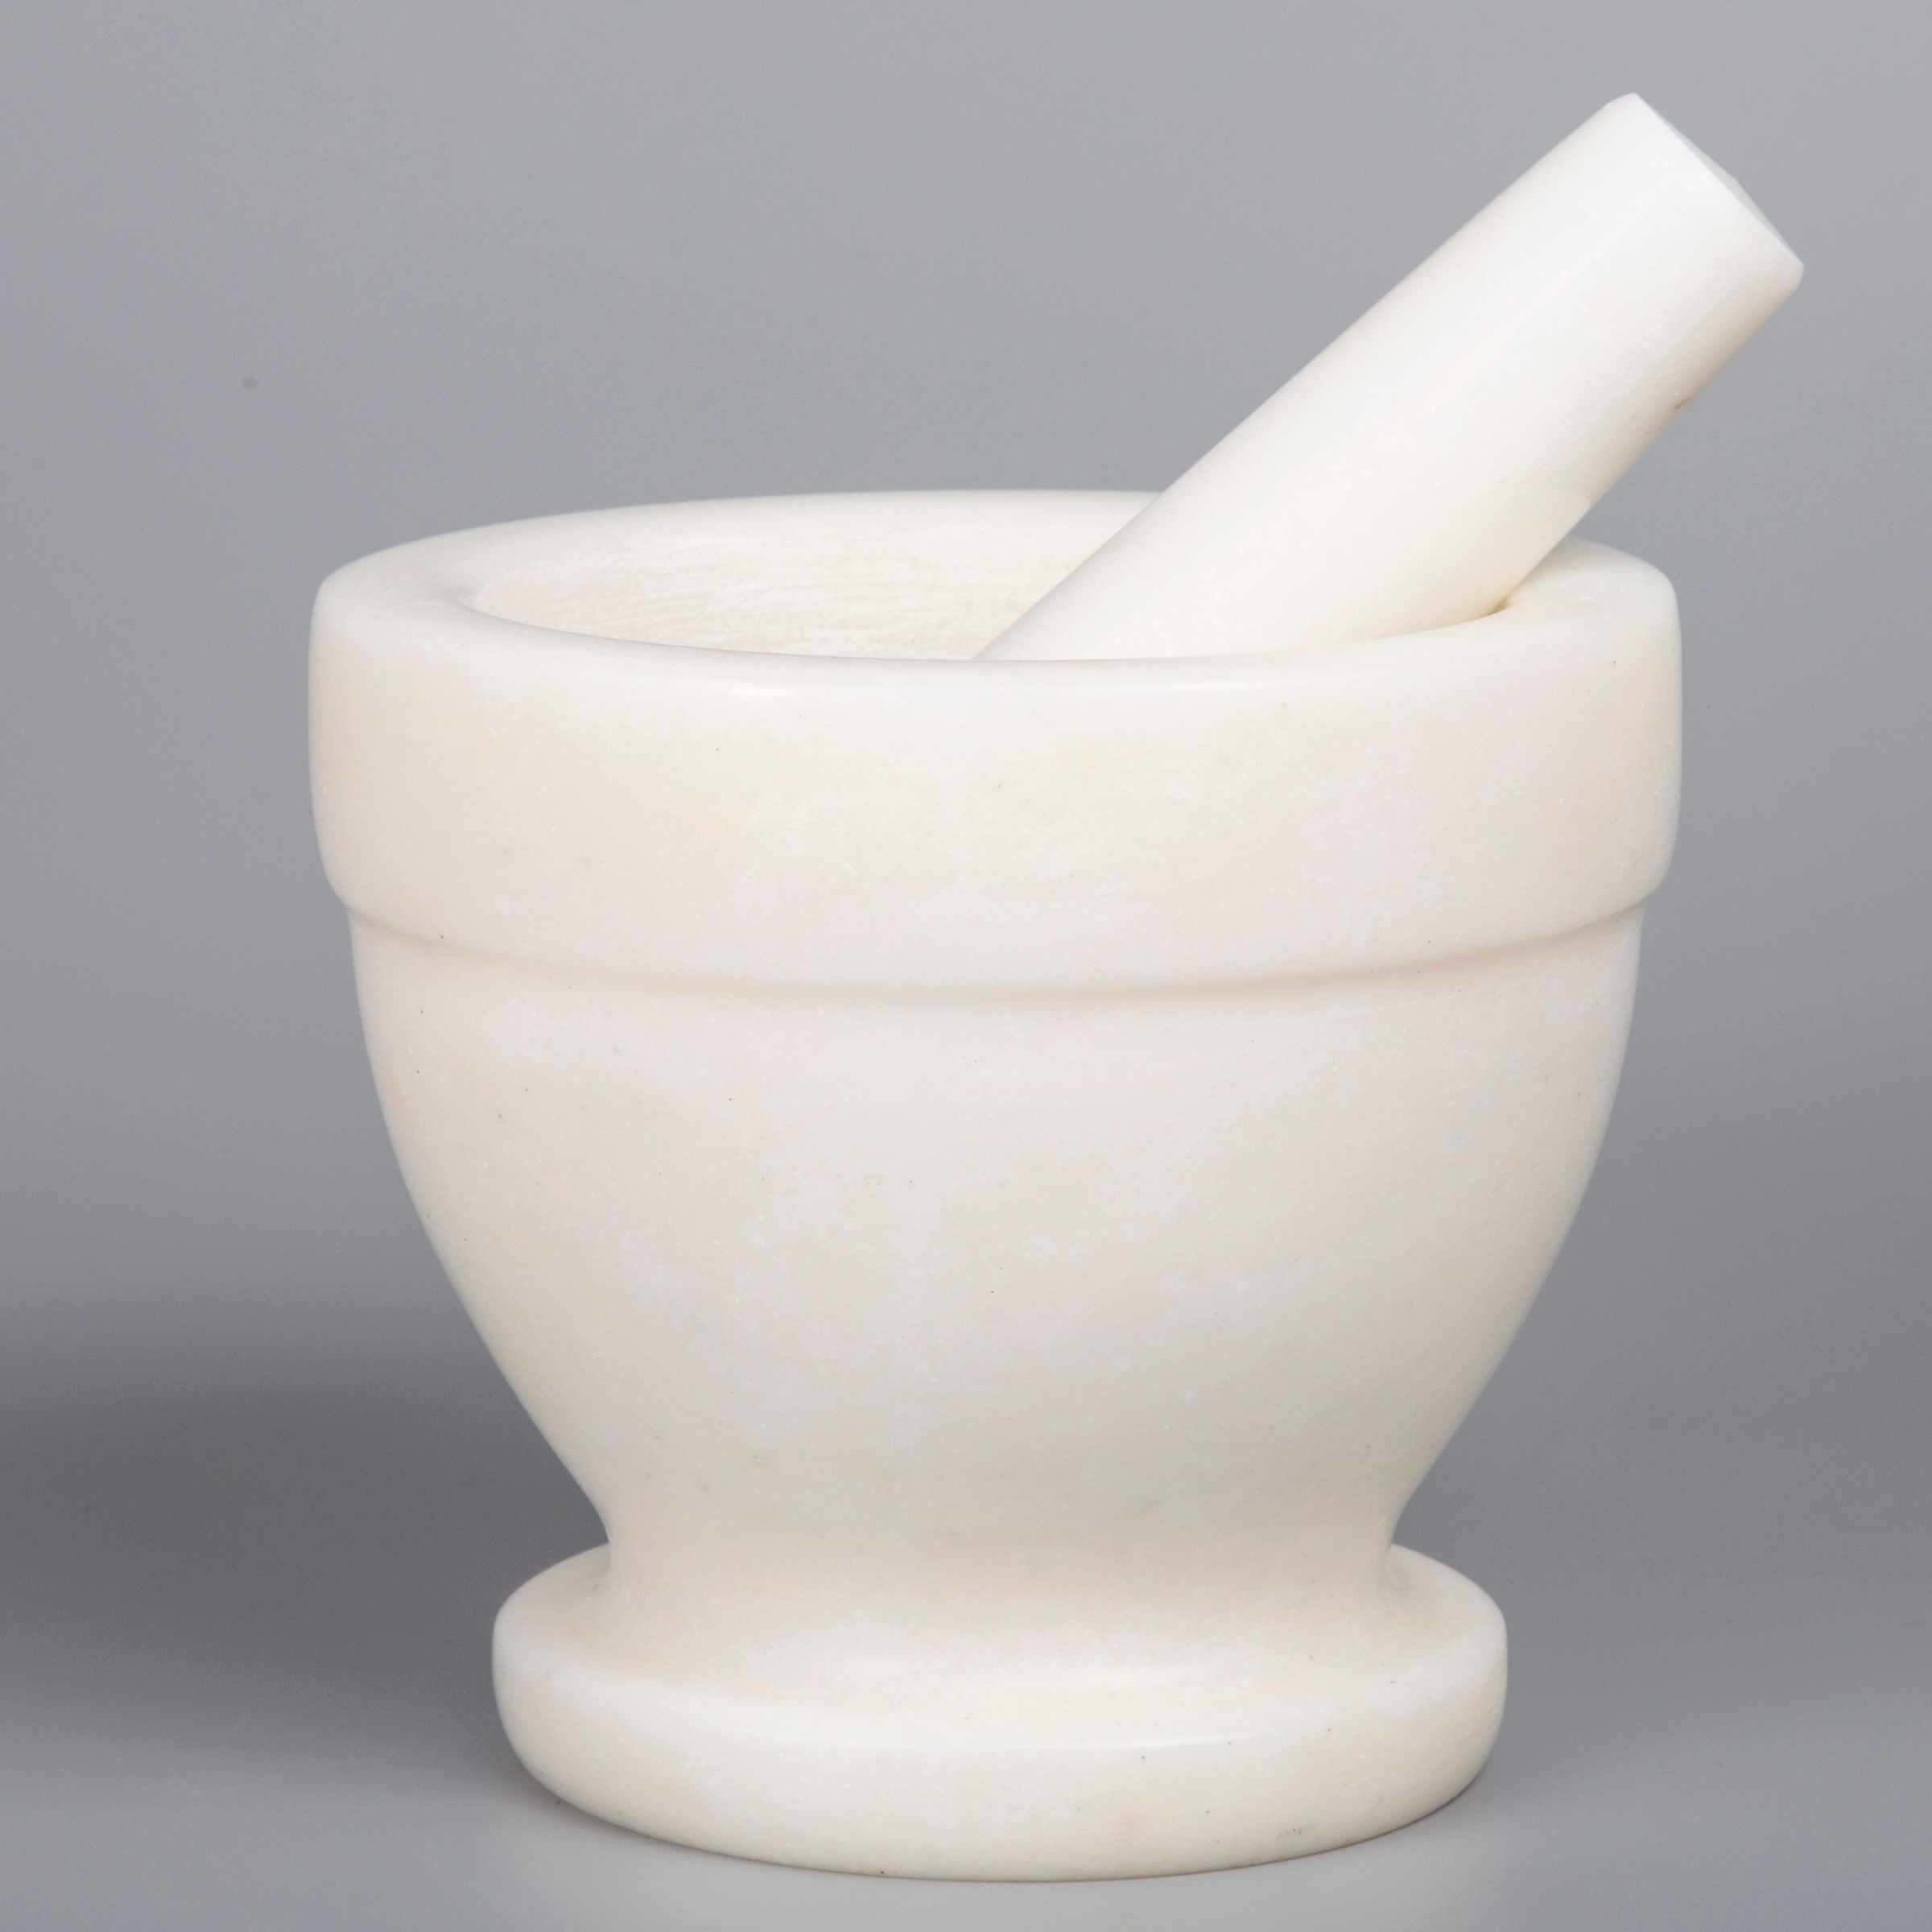 https://ak1.ostkcdn.com/images/products/is/images/direct/bcf59a30e94a1bab4e9b1f04a162b31fb5cae645/Creative-Home-Natural-Off-White-Marble-Mortar-and-Pestle-Set%2C-Kitchen-Spices%2C-Herbs%2C-Pesto-Grinder%2C-5-1-4%22-Diam.-x-4-1-2%22-H.jpg